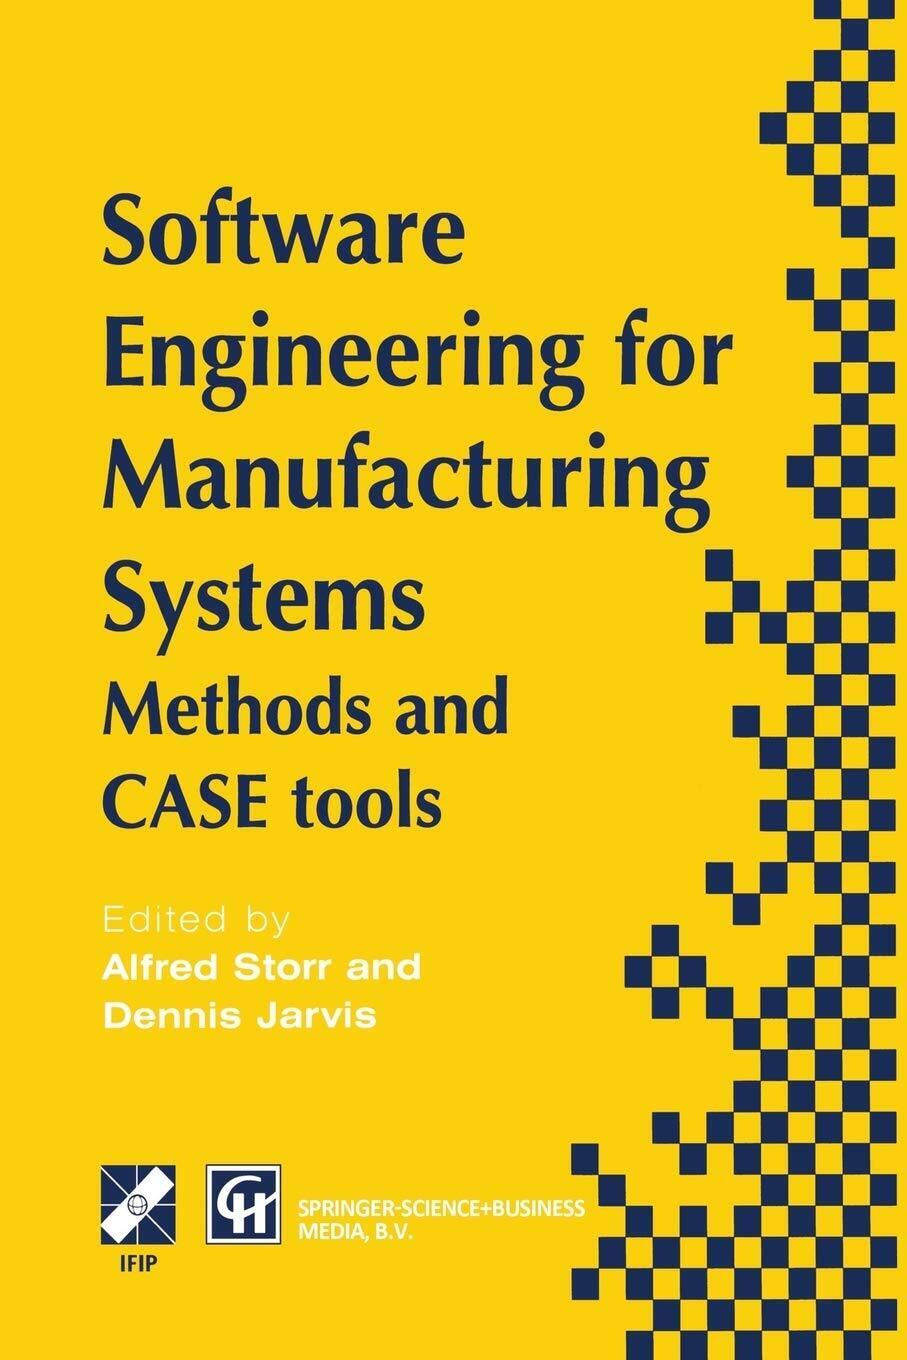 Software Engineering for Manufacturing Systems - Alfred Storr - Springer, 2013